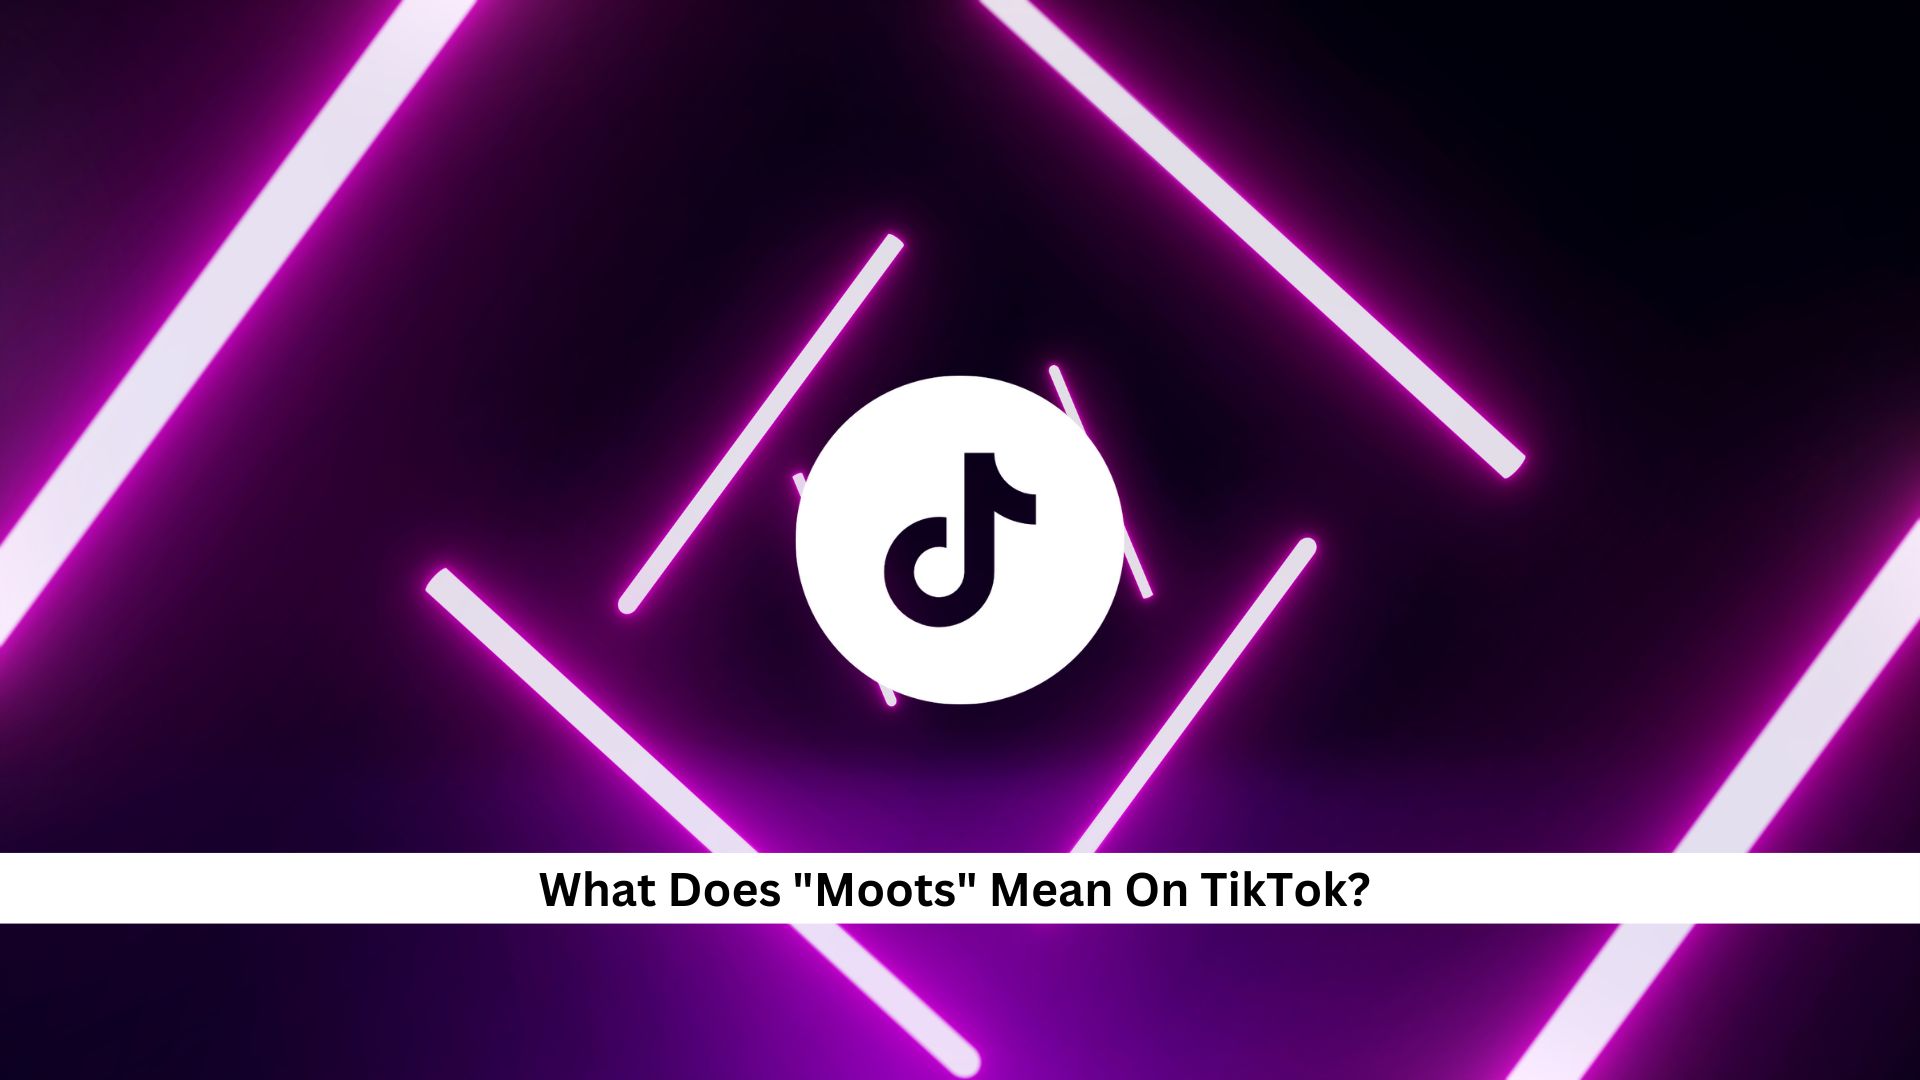 Moots-Meaning-On-TikTok